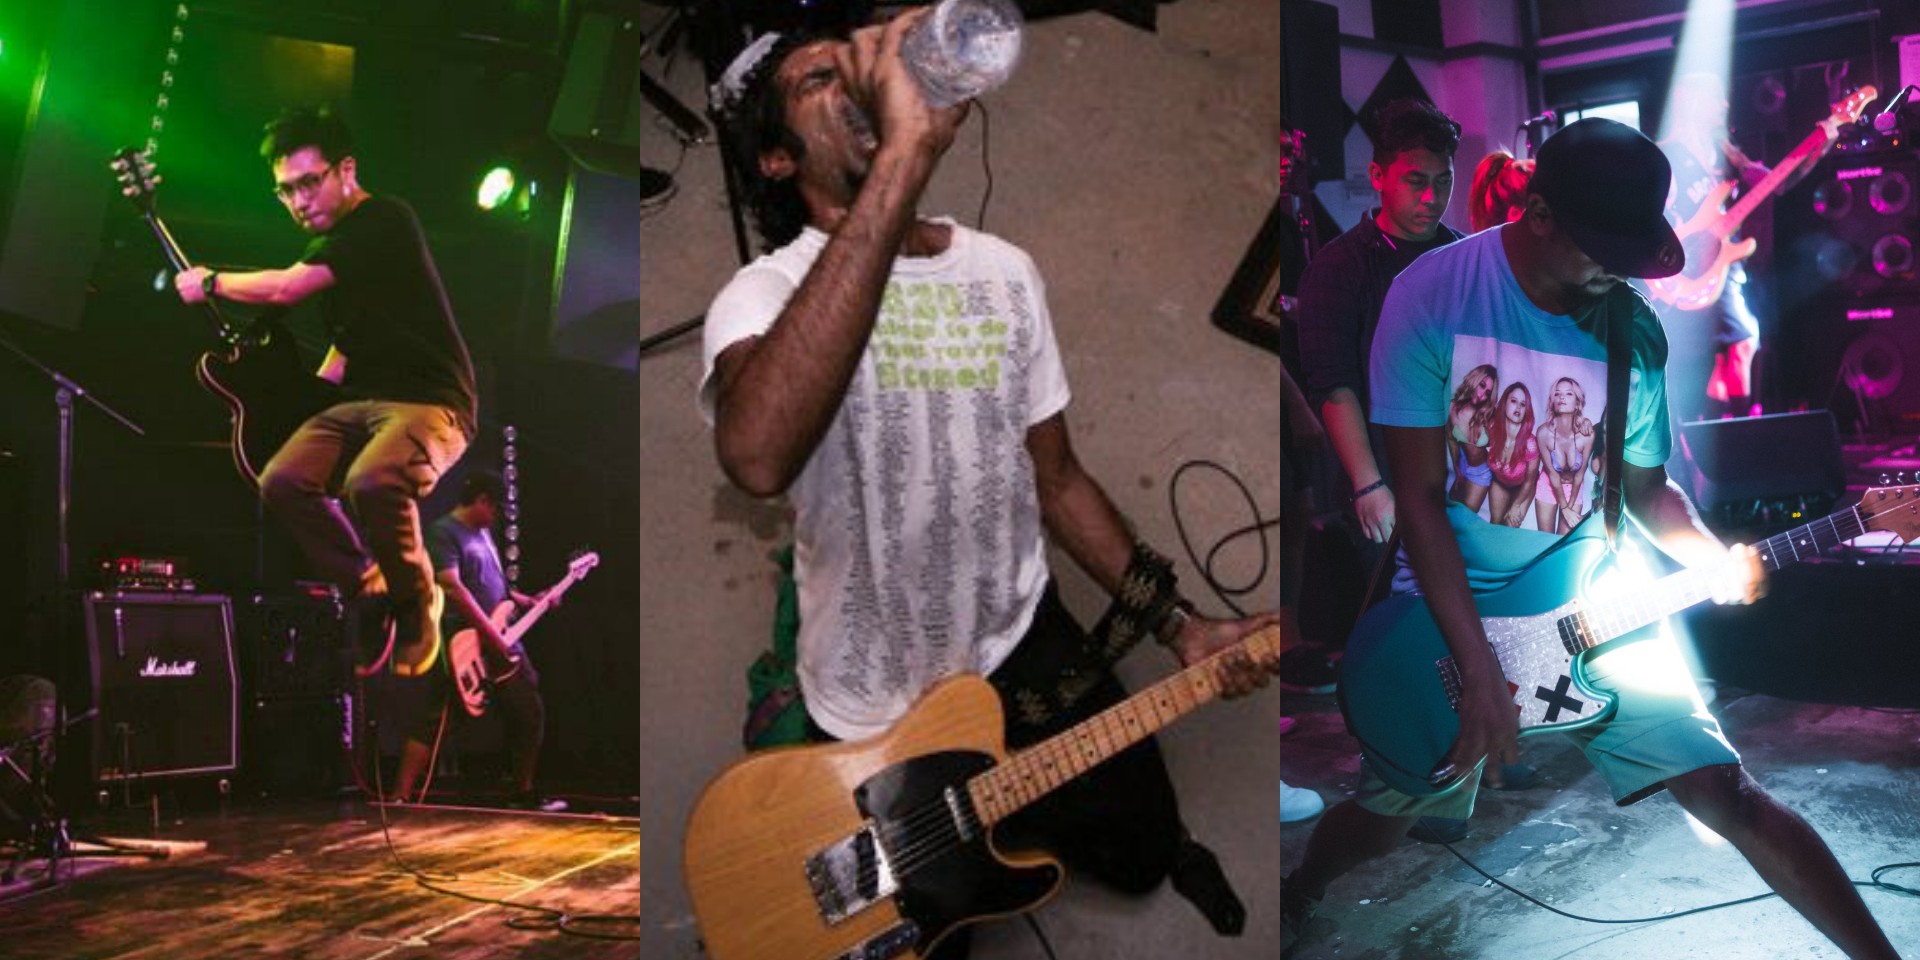 Thambi K Seaow, Plainsunset, Take-Off and Amterible to perform together next month